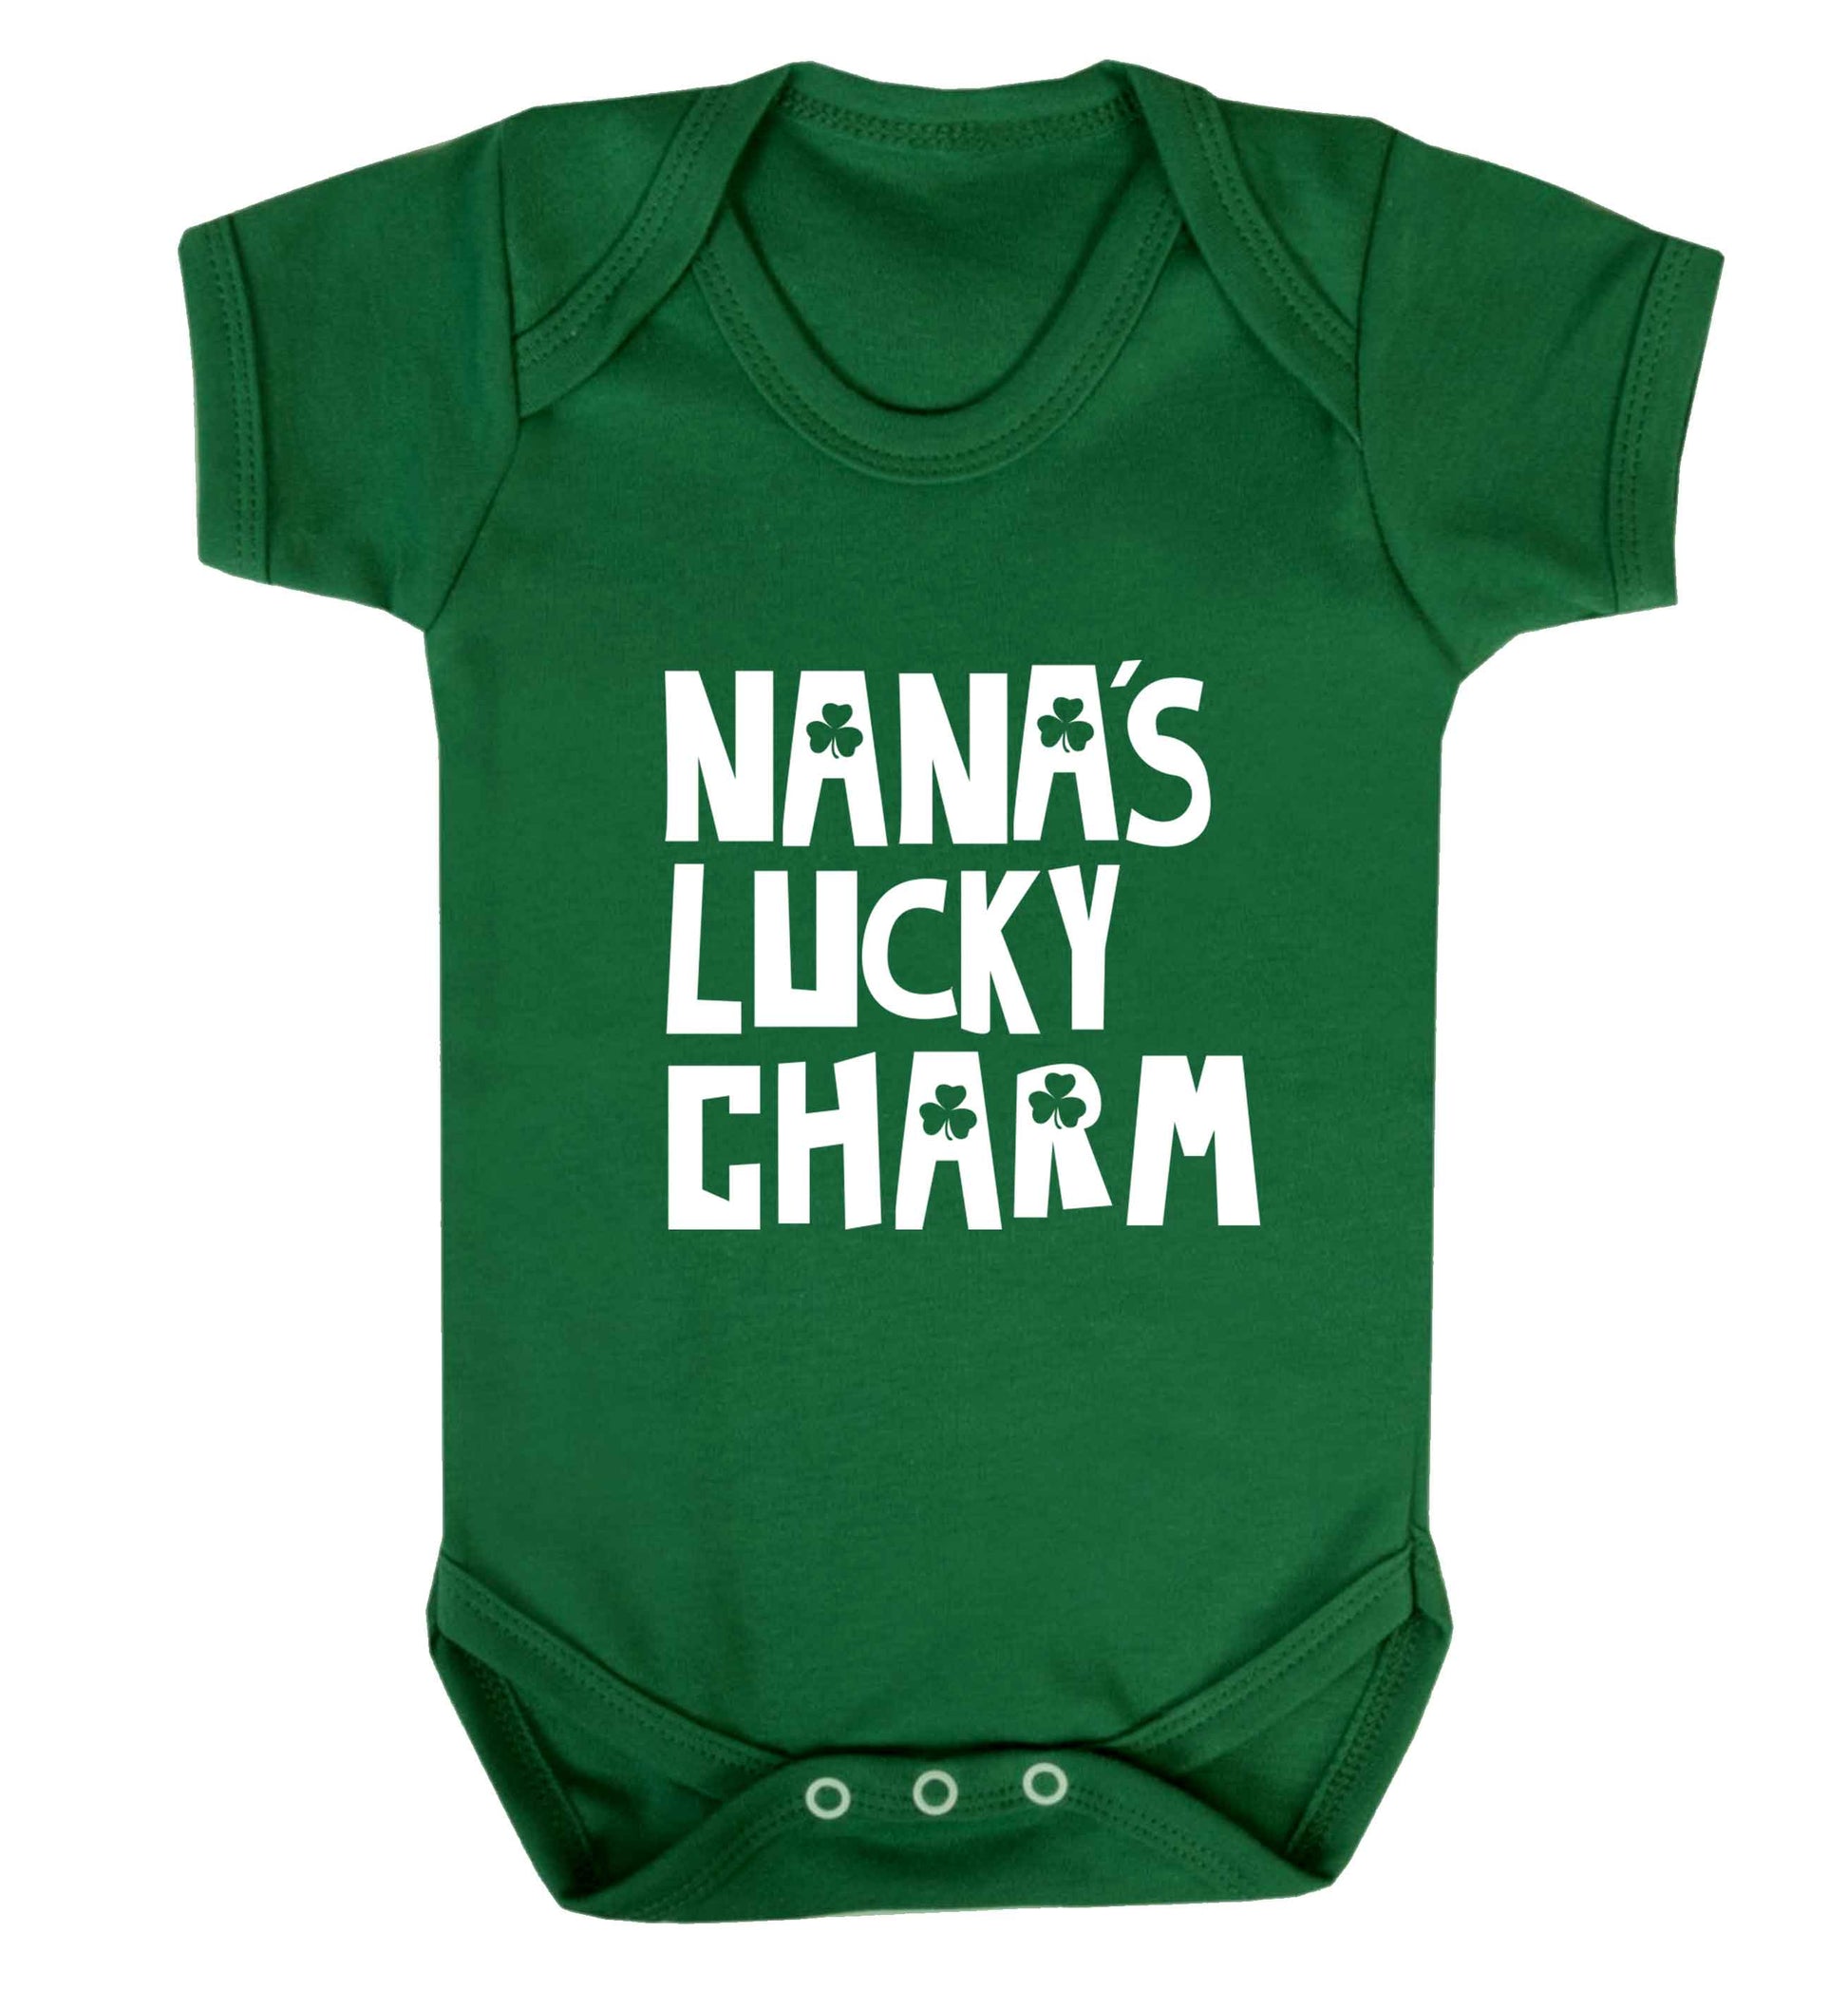 Nana's lucky charm baby vest green 18-24 months